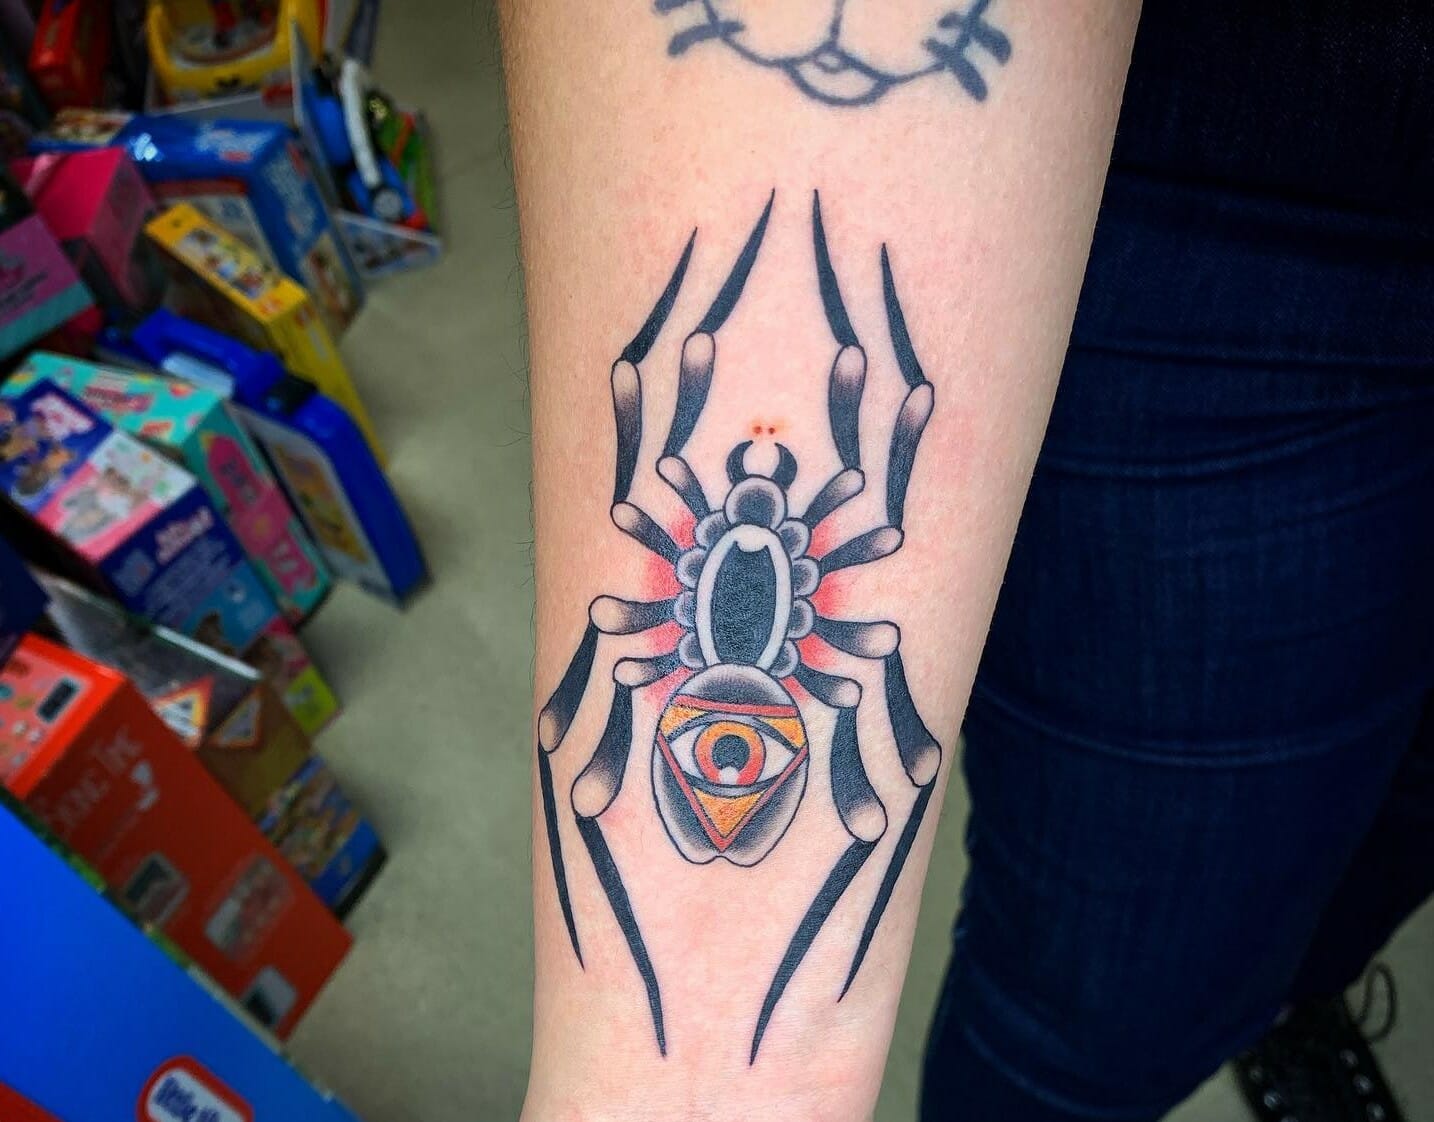 50 Traditional Spider Tattoo Designs For Men  Webs Of Ideas